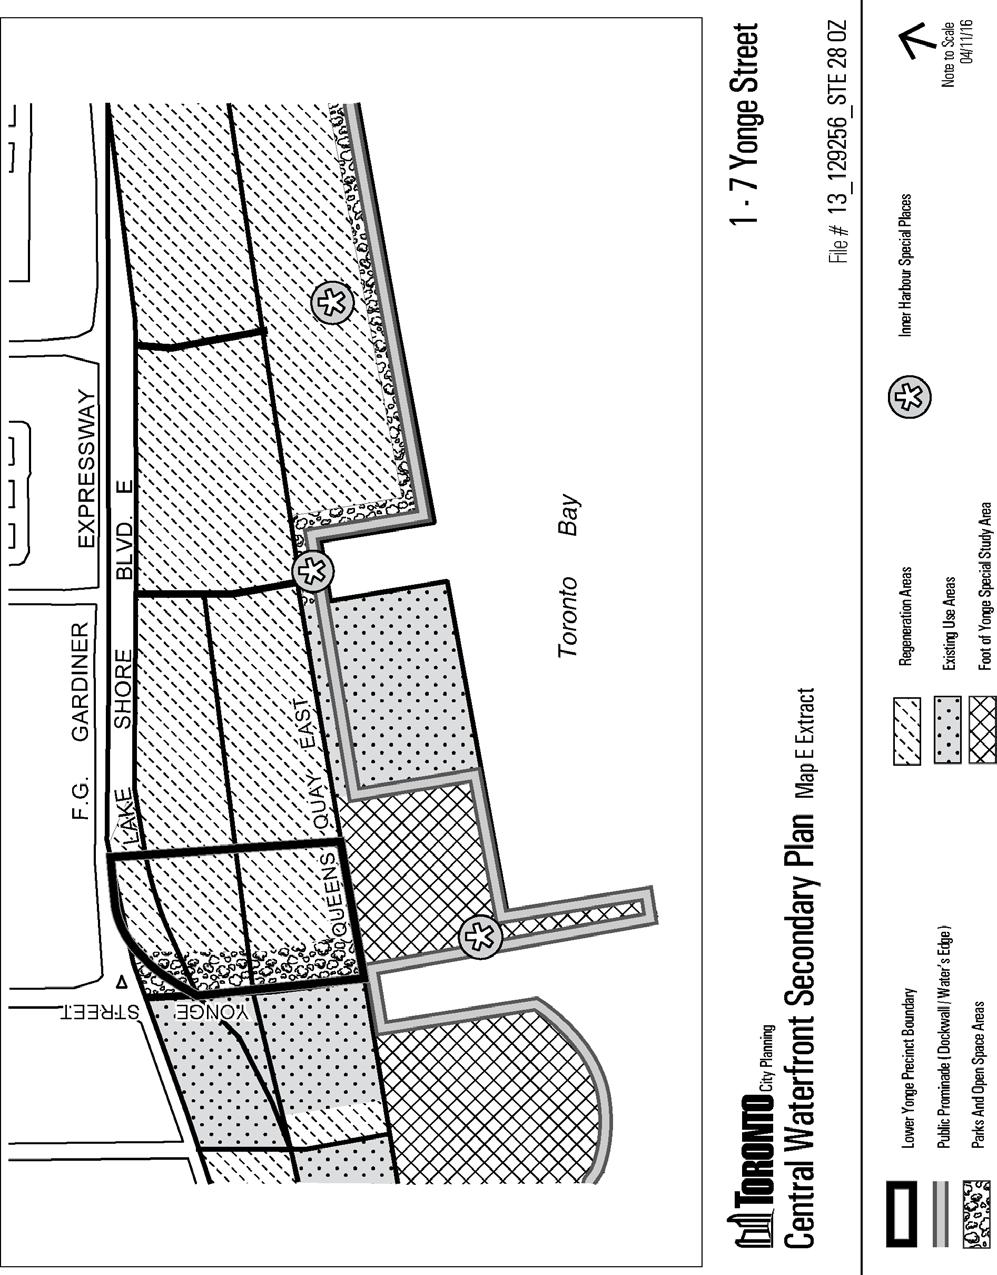 Attachment 13: Central Waterfront Secondary Plan (excerpt)